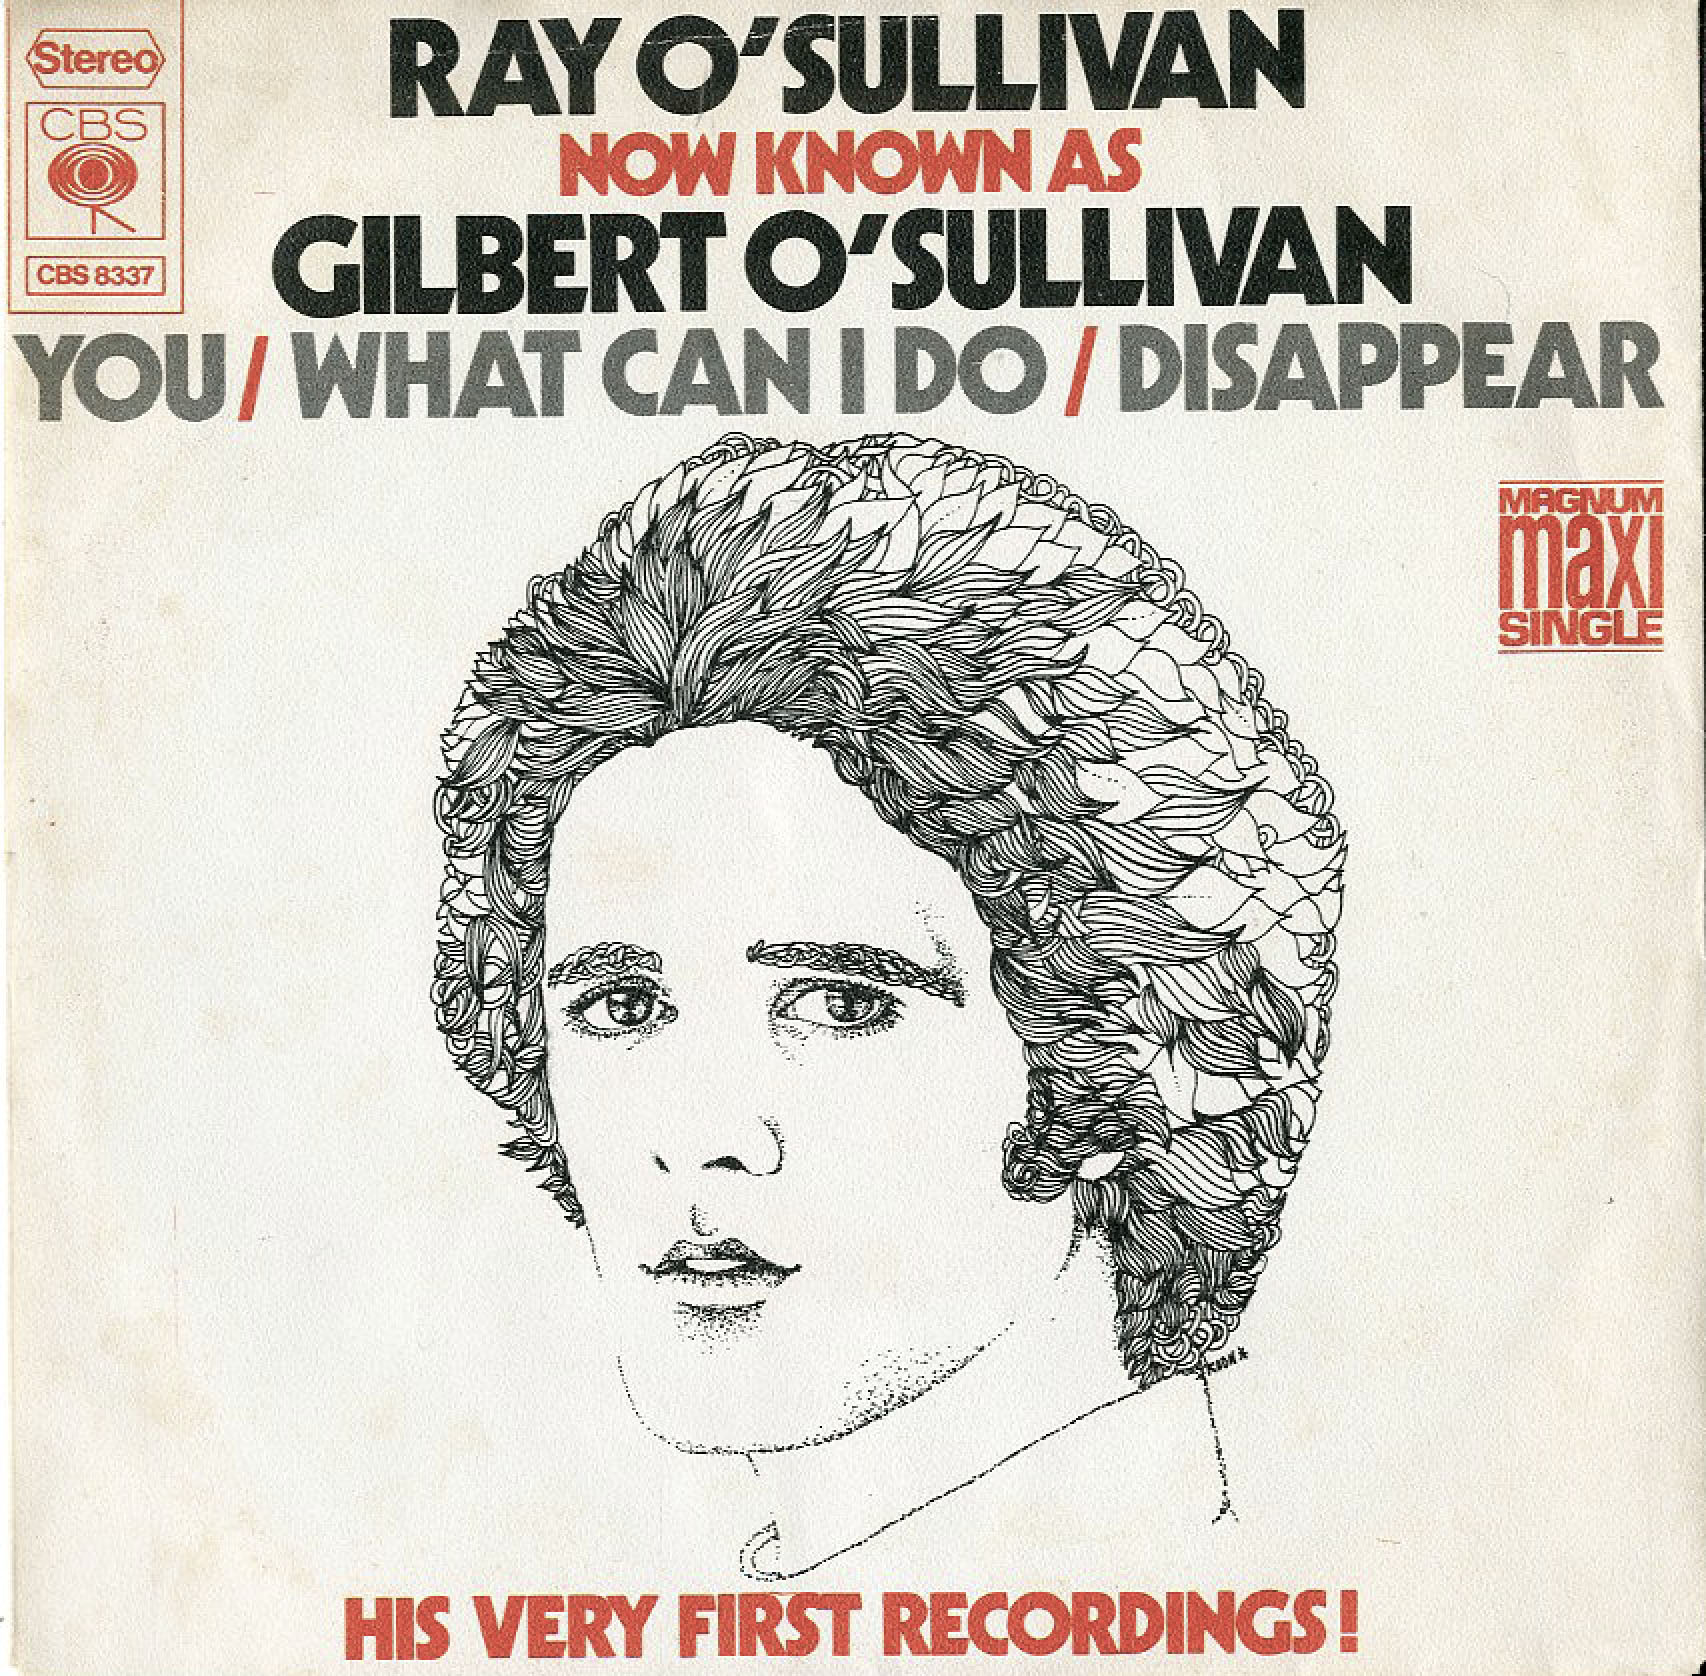 Albumcover Gilbert O´Sullivan - You / What Can I Do / Disappaer (Maxi Single) by Ray O Sullivan (known as Gilbert - His very first recording